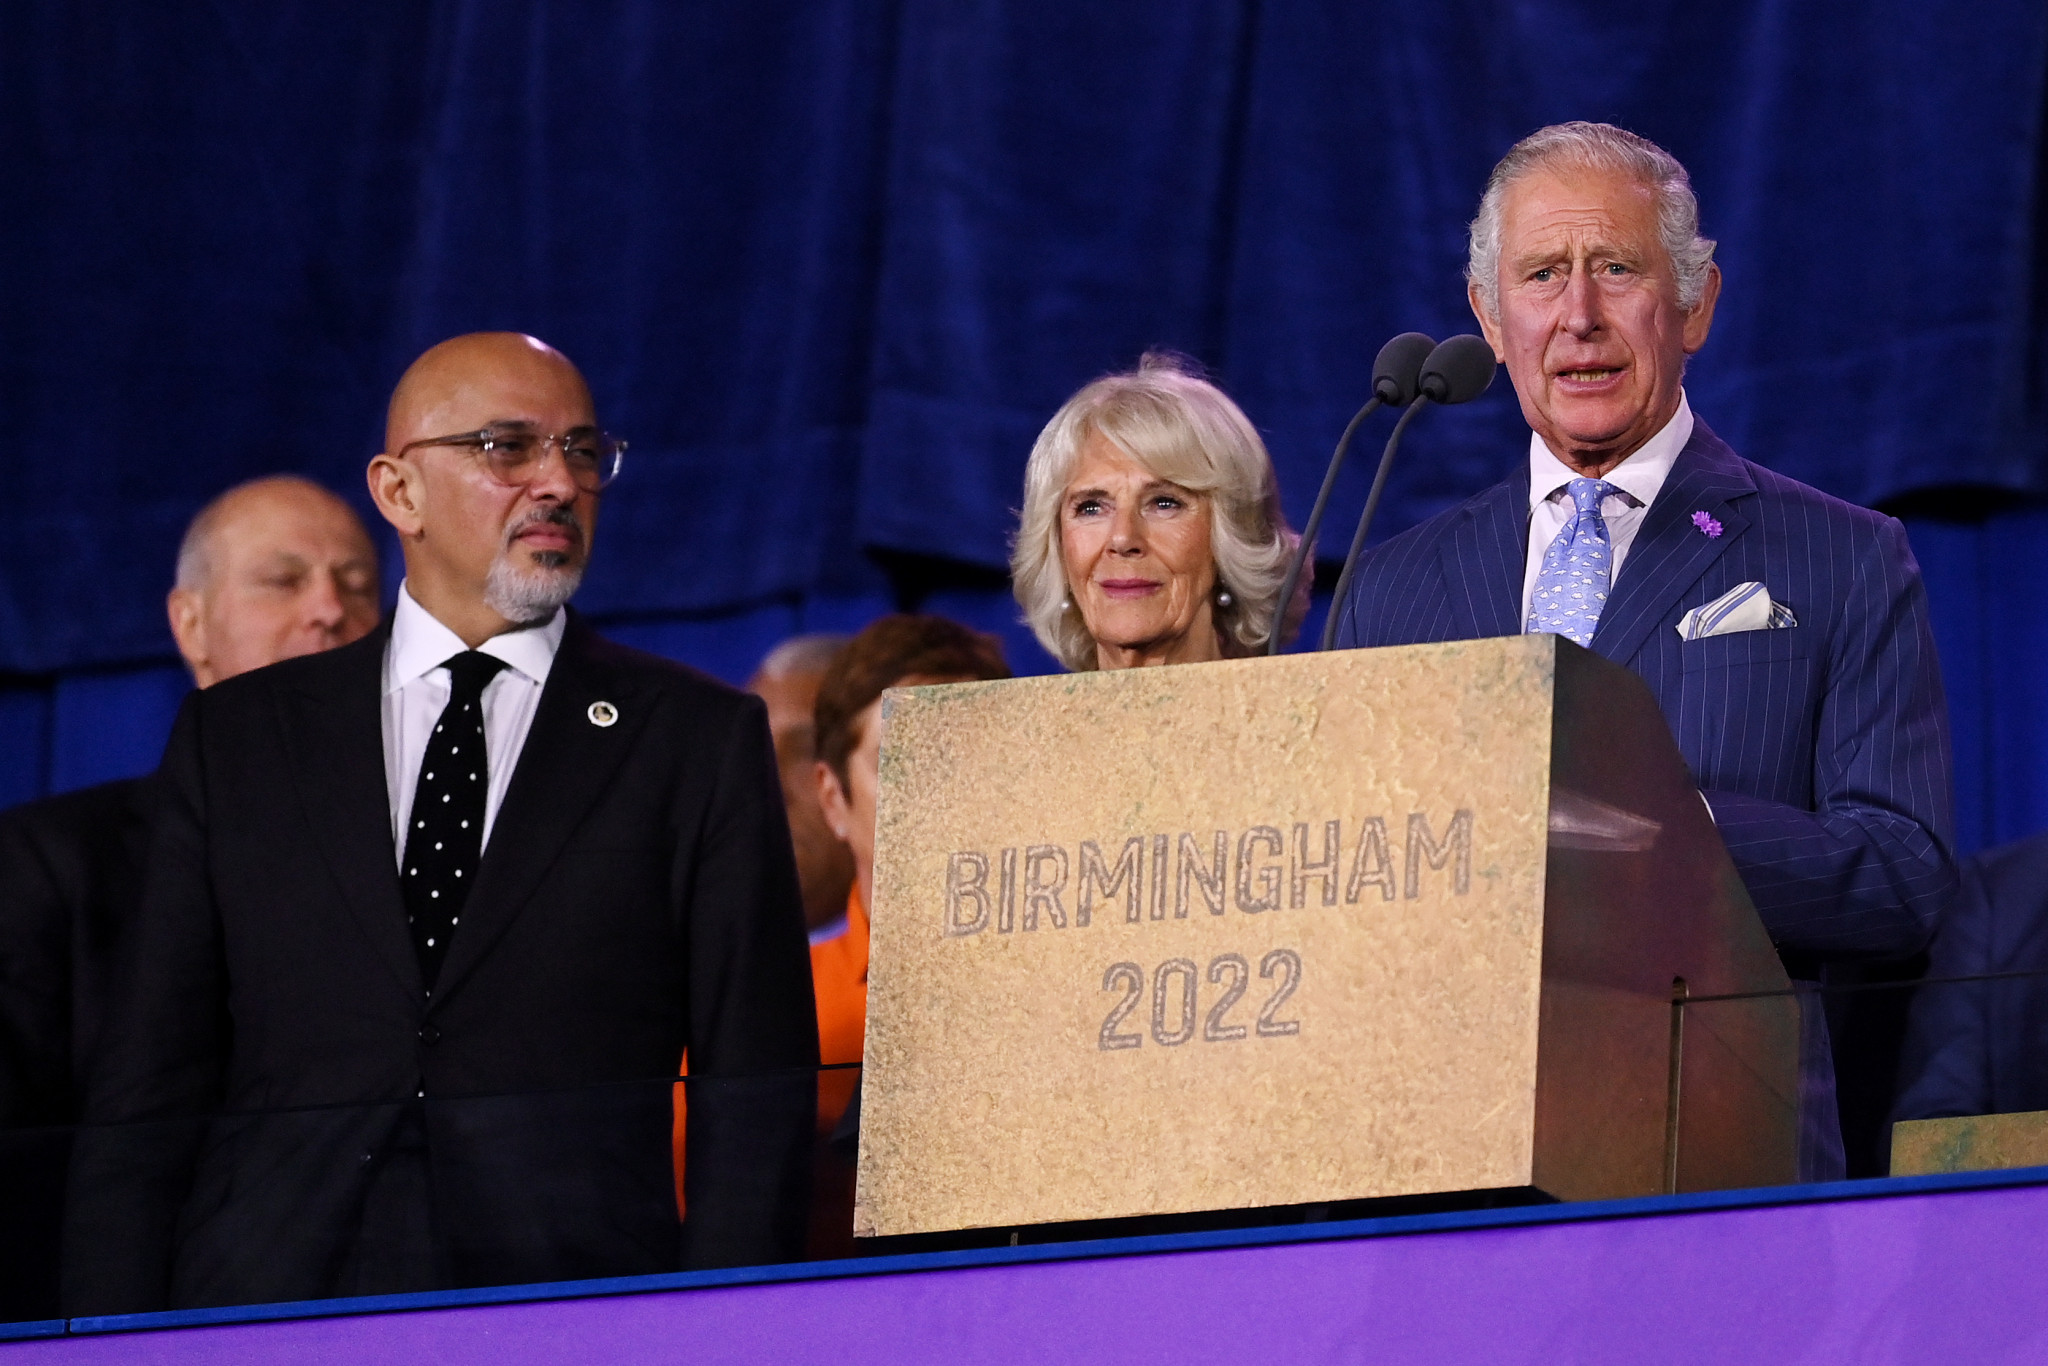 Queen Elizabeth II uses message at Opening Ceremony to describe Birmingham as symbolic of Commonwealth unity